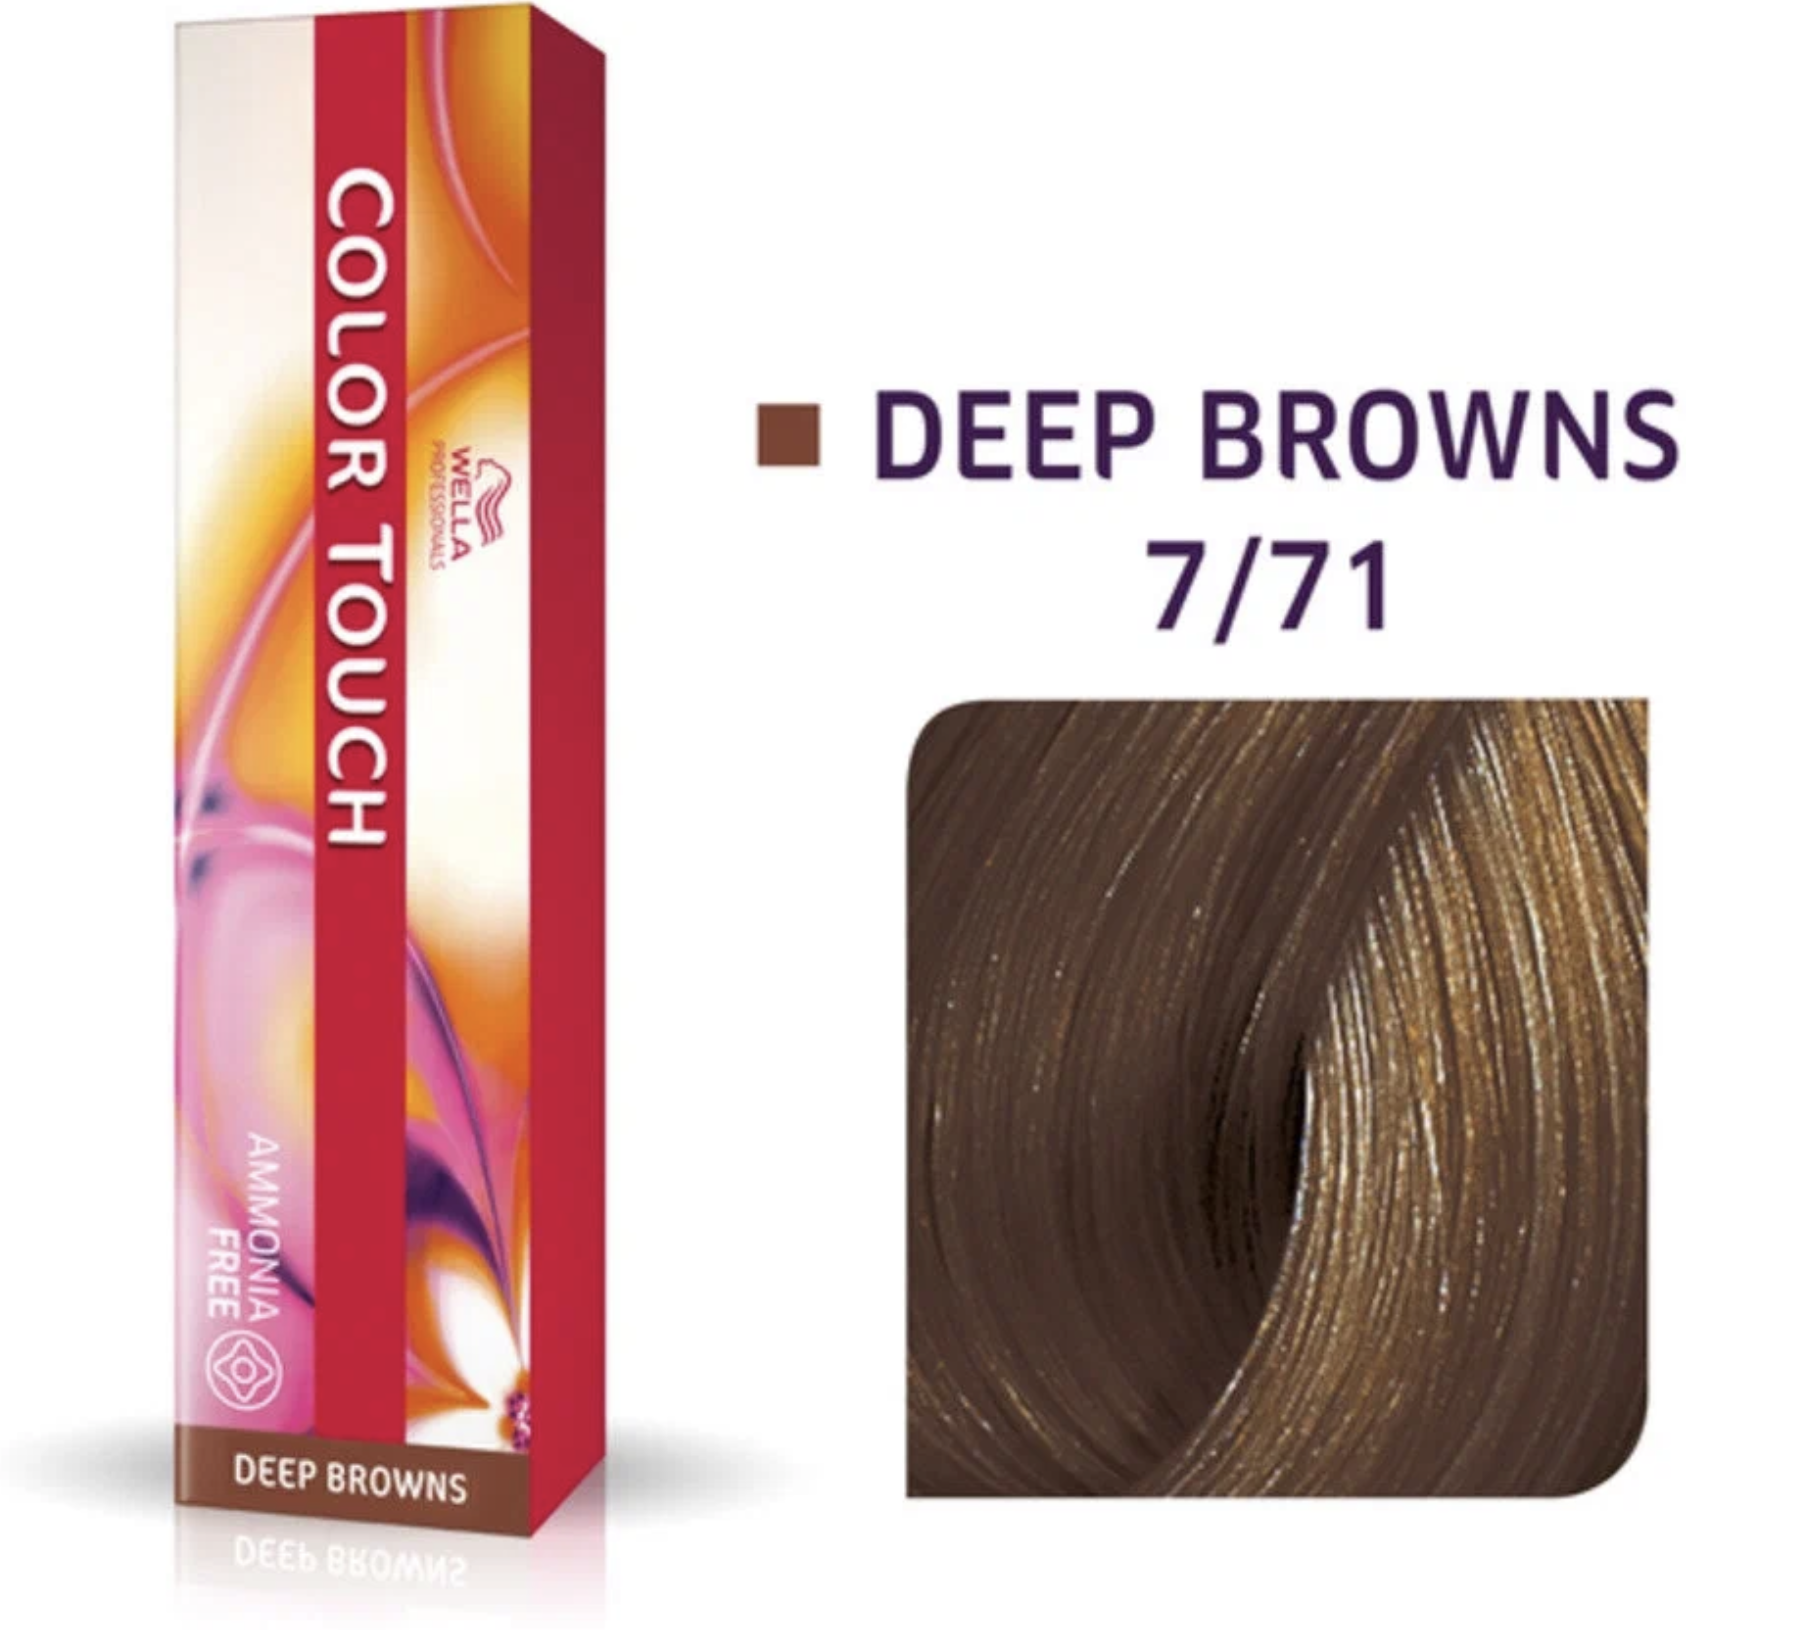   / Wella Color Touch - -    7/71   60 